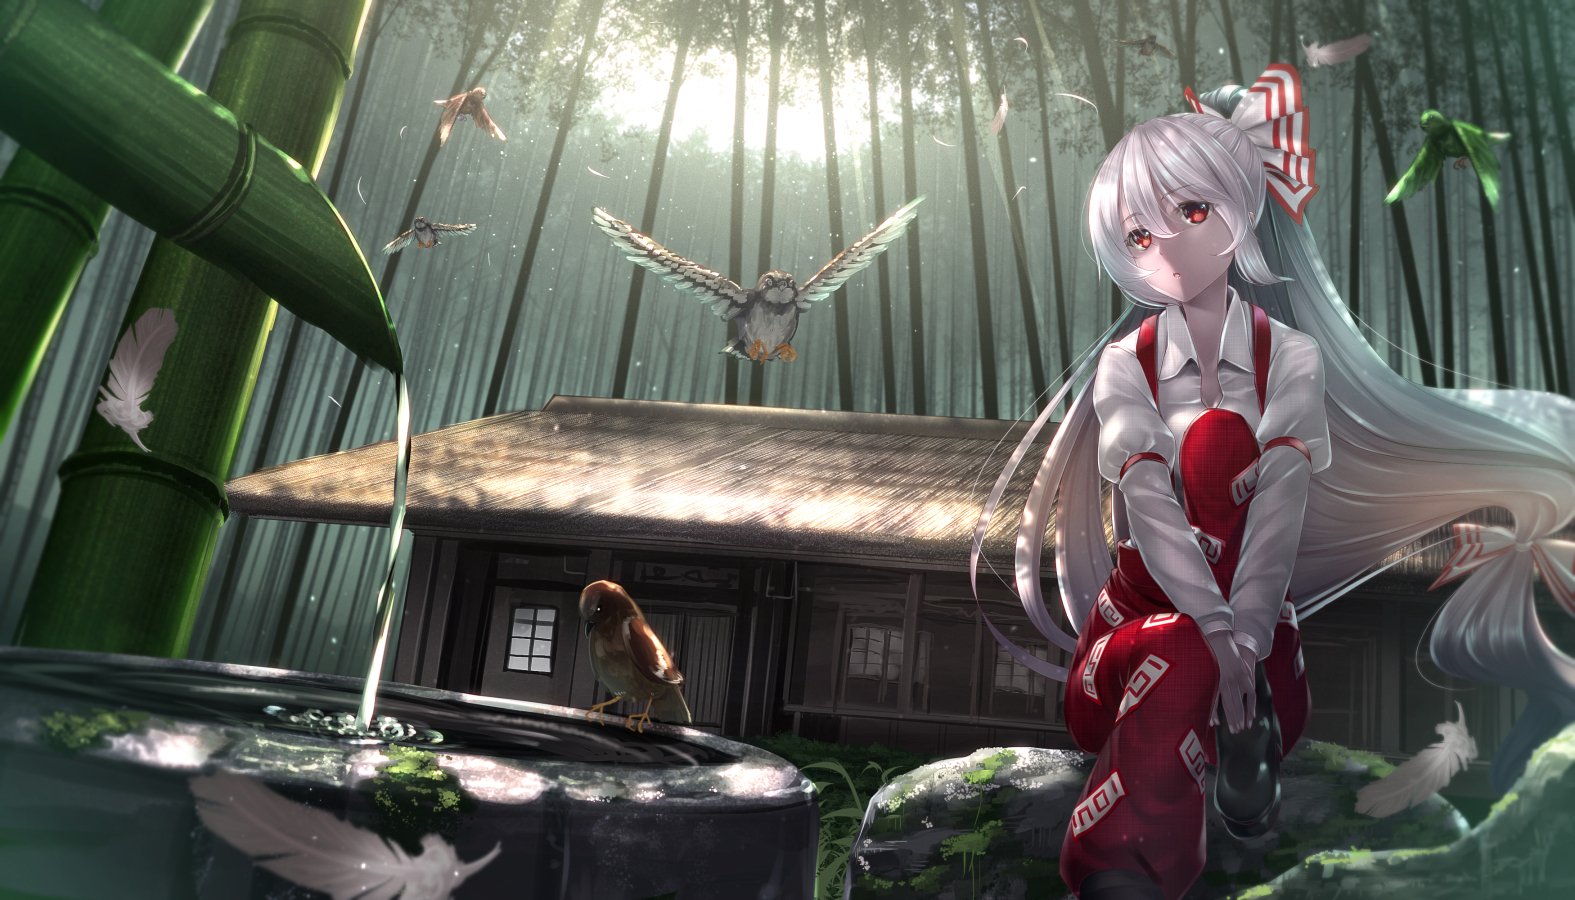 touhou, Anime, Series, Girl, Animal, Bird, House, Nature, Water, Forest, Sunlight, Feathers Wallpaper